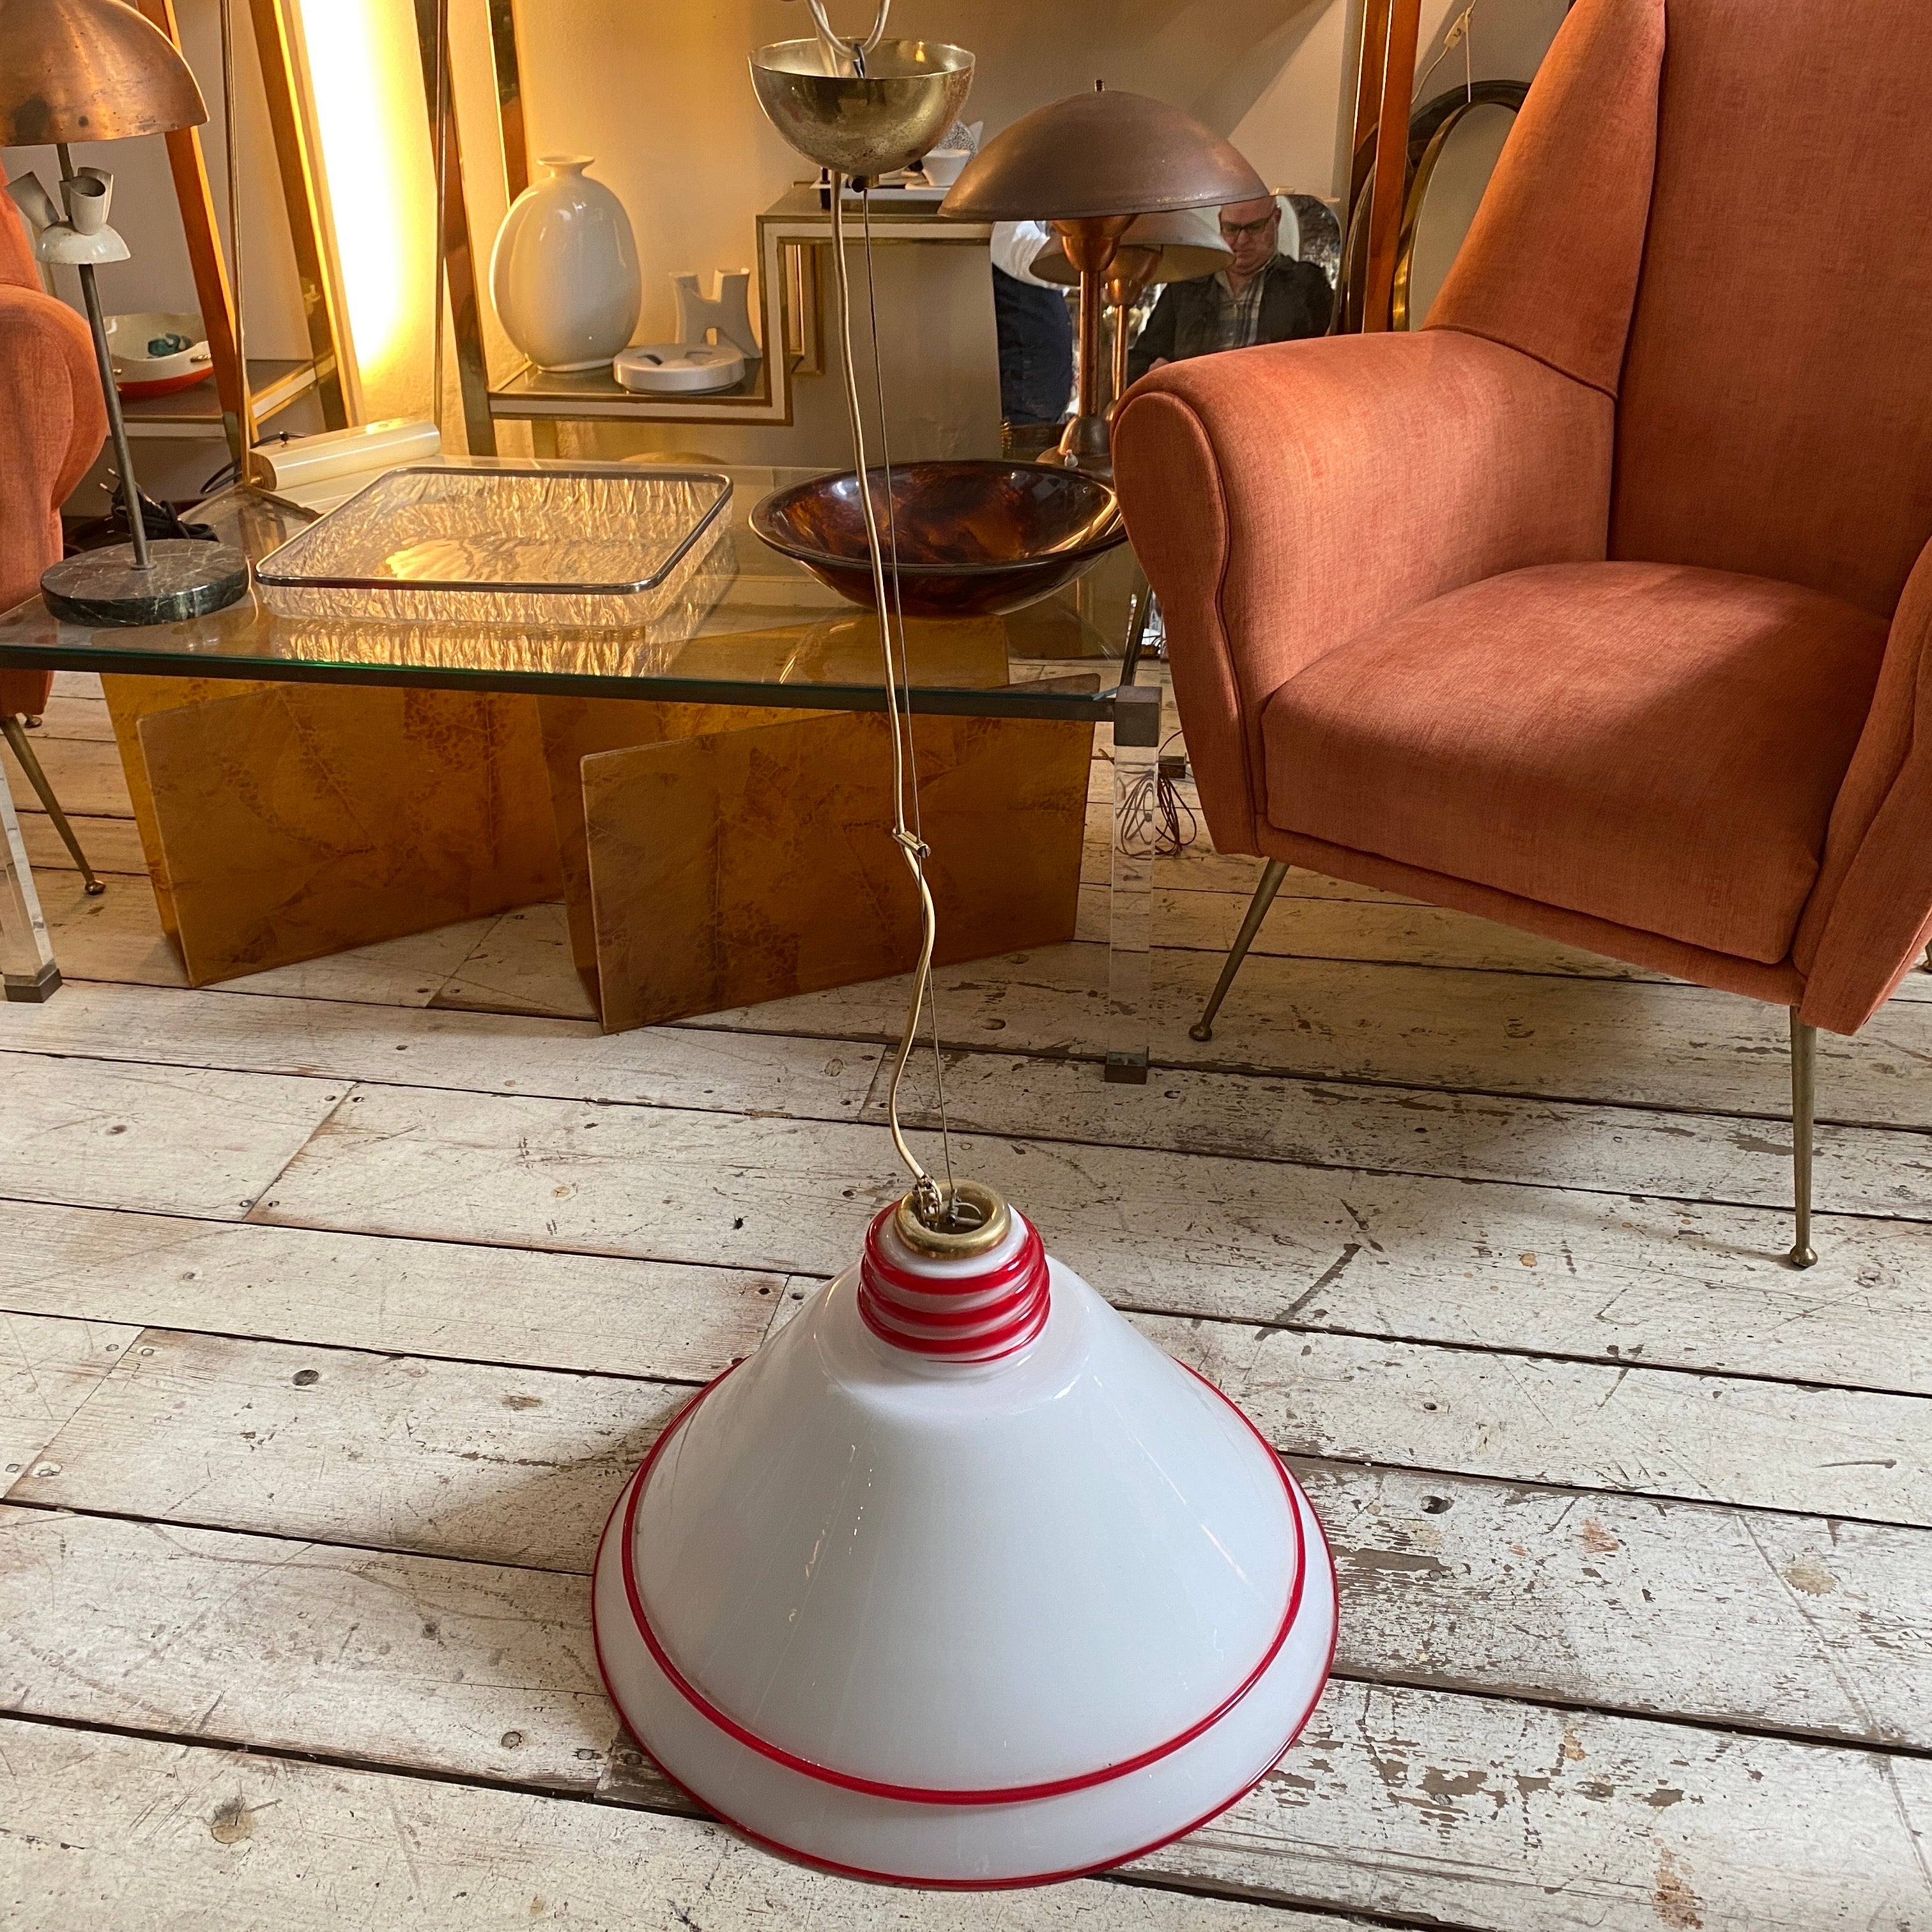 A modernist white and red murano glass pendant designed and manufactured in Italy by Toso, height of the glass part is cm 33, brass it's in original patina, glass it's in perfect condition. It works both 110-240 volts and needs a regular e 27 bulb.